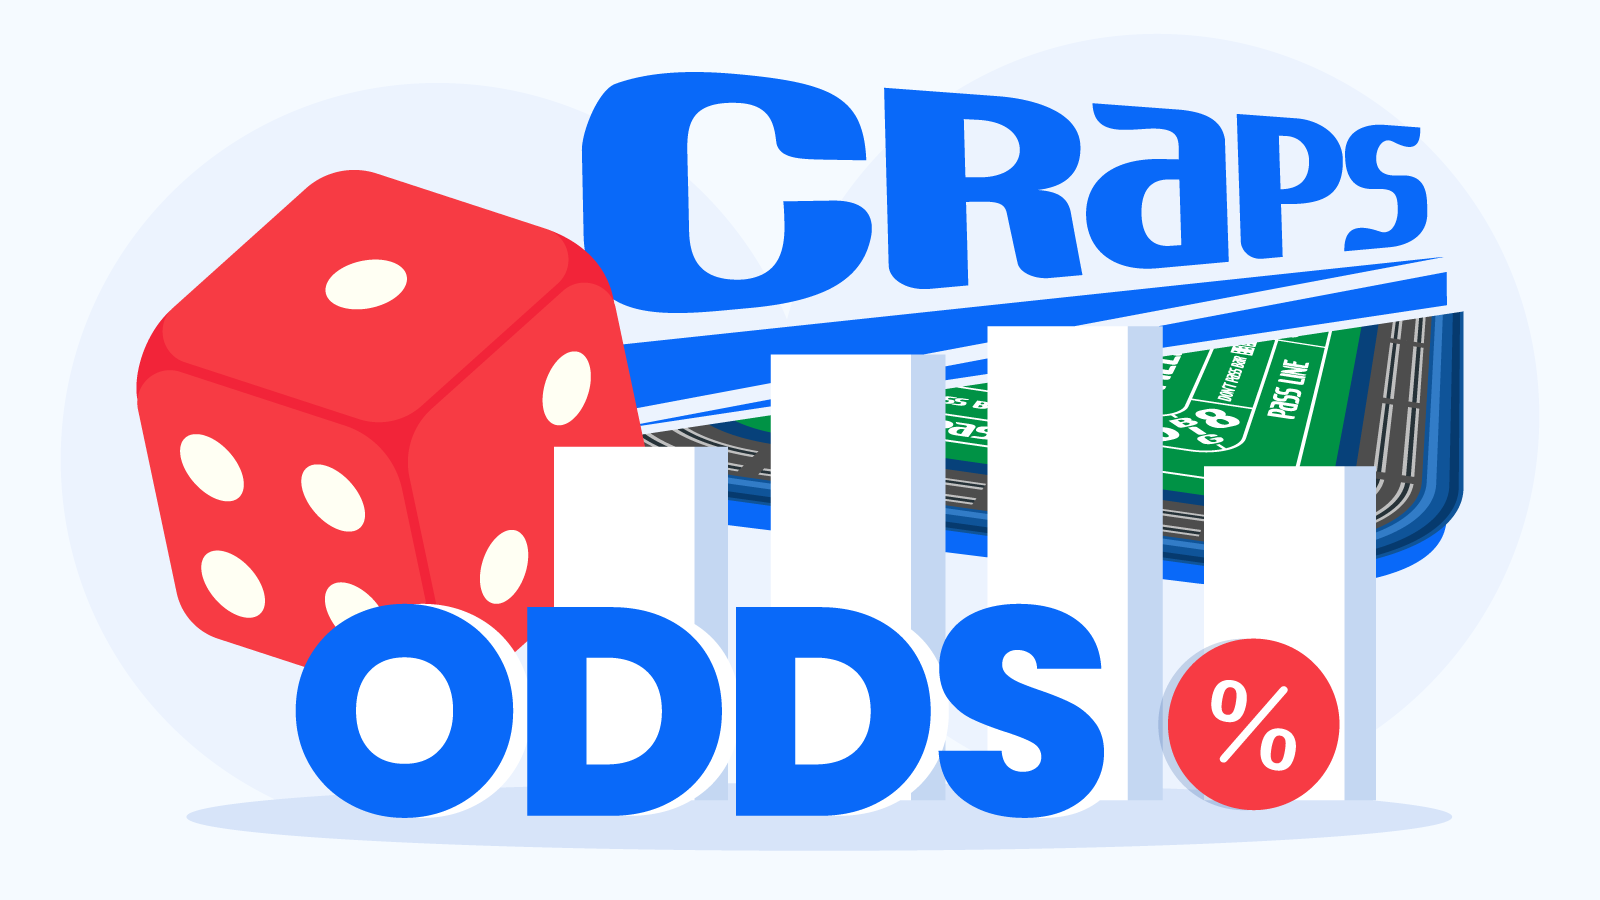 Learn Craps Odds And Payouts